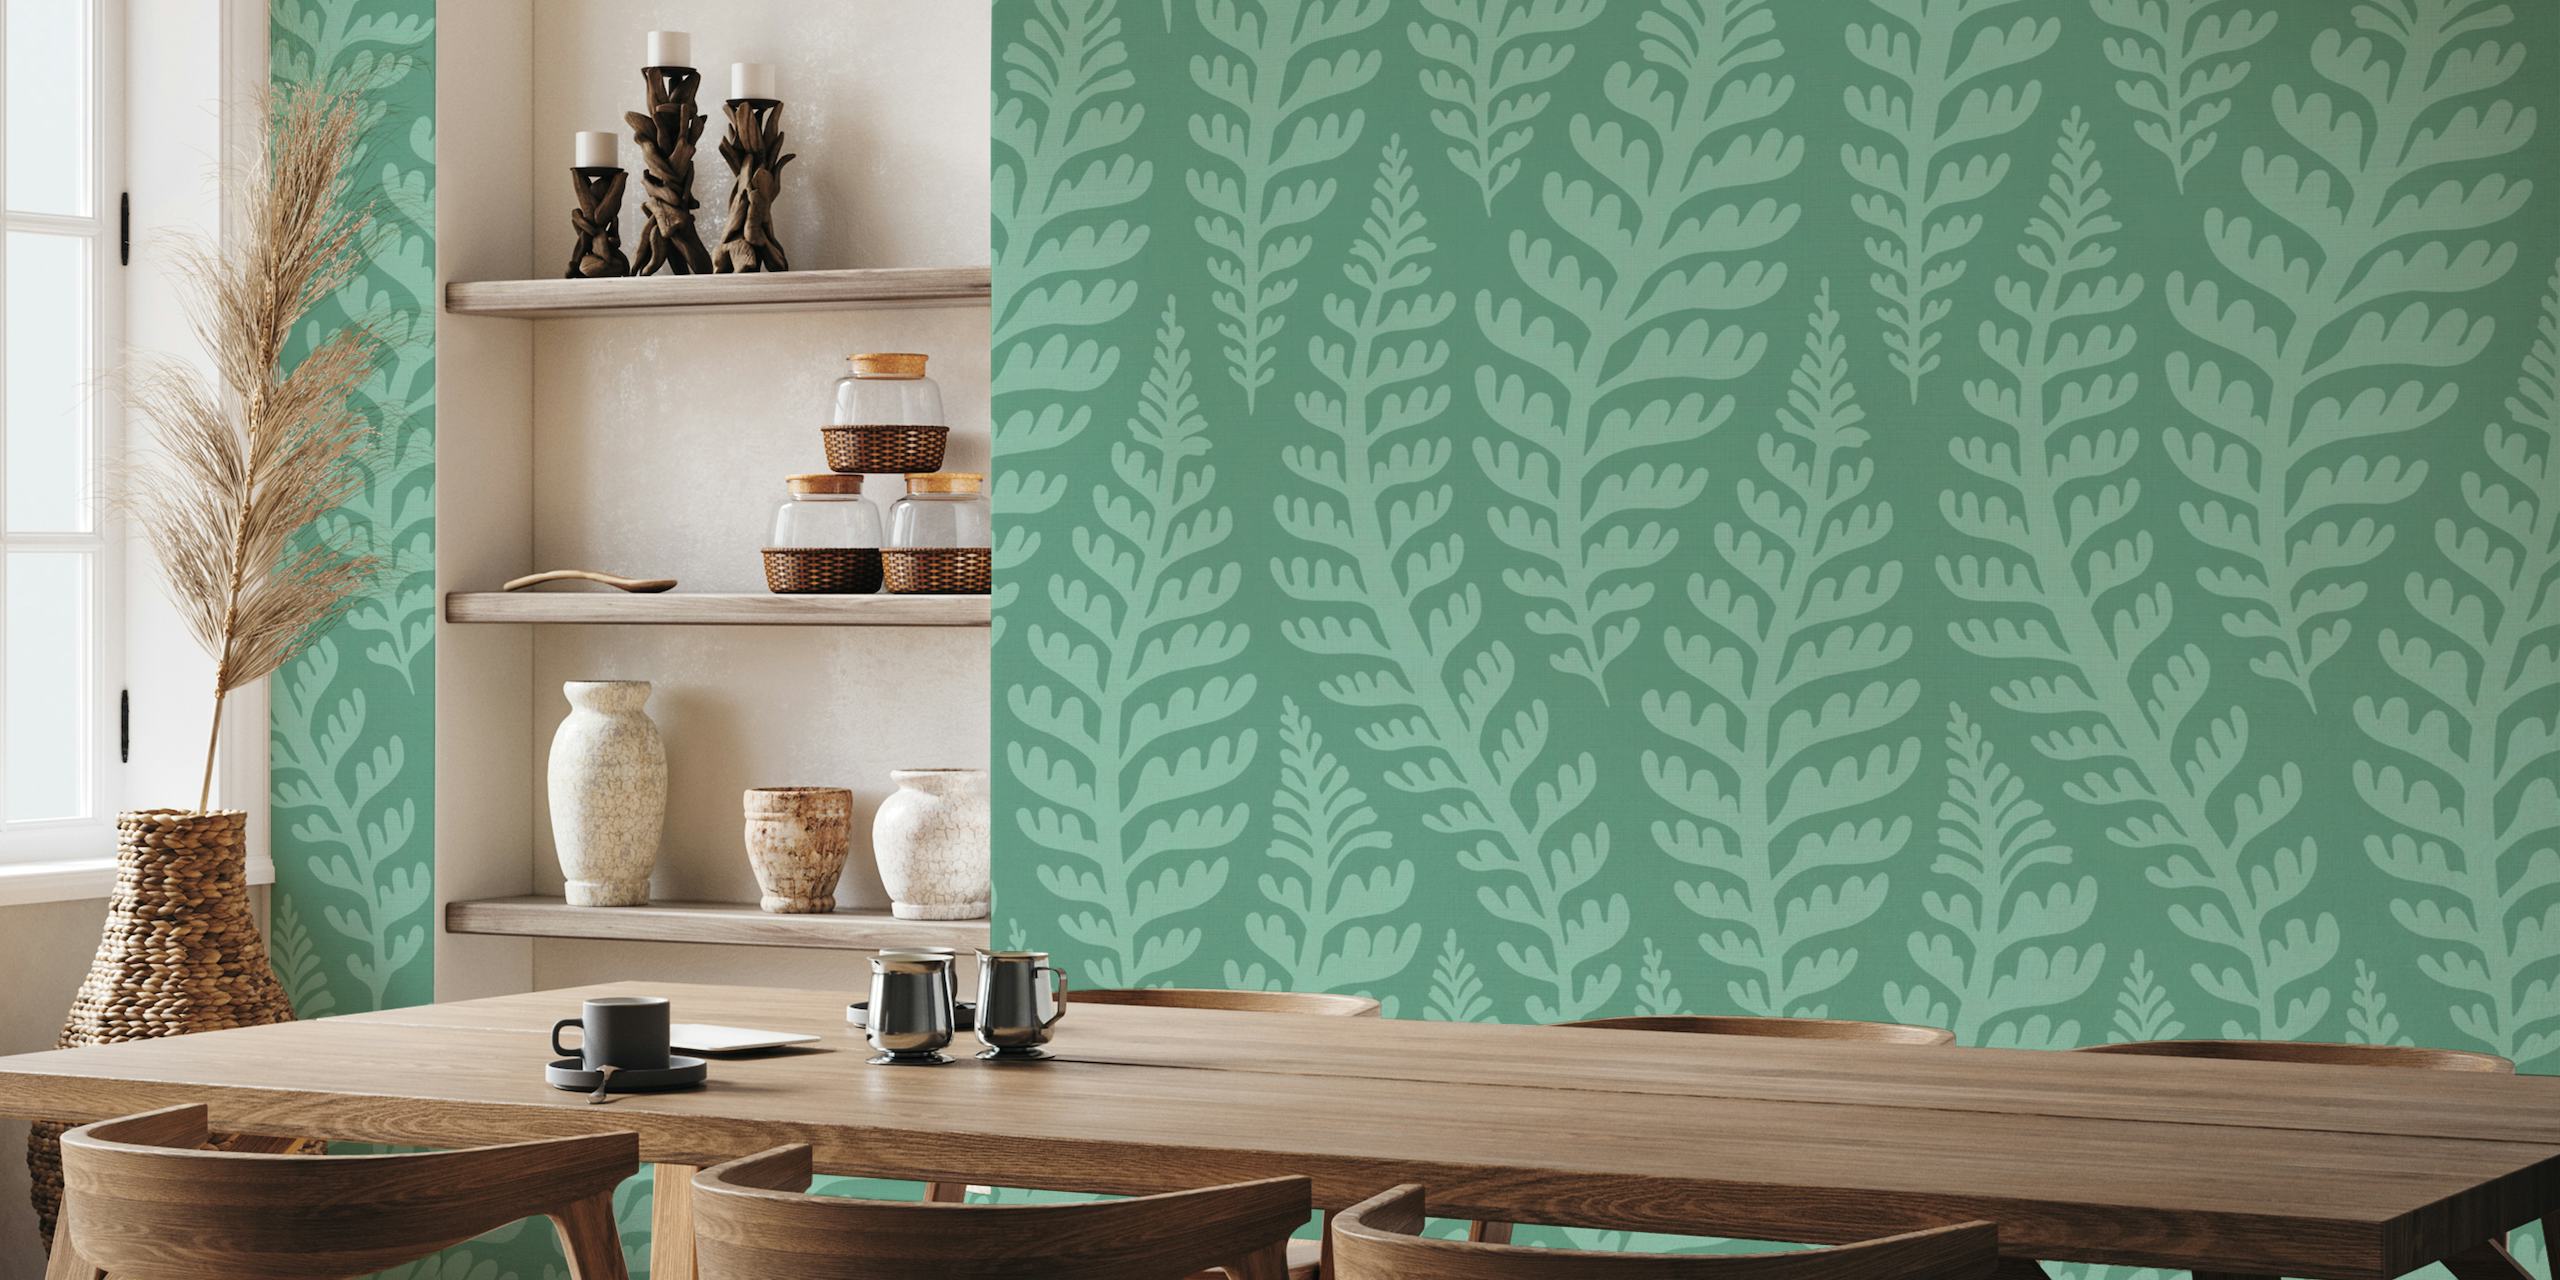 Fern Chain Sage botanical pattern wall mural in tranquil green hues